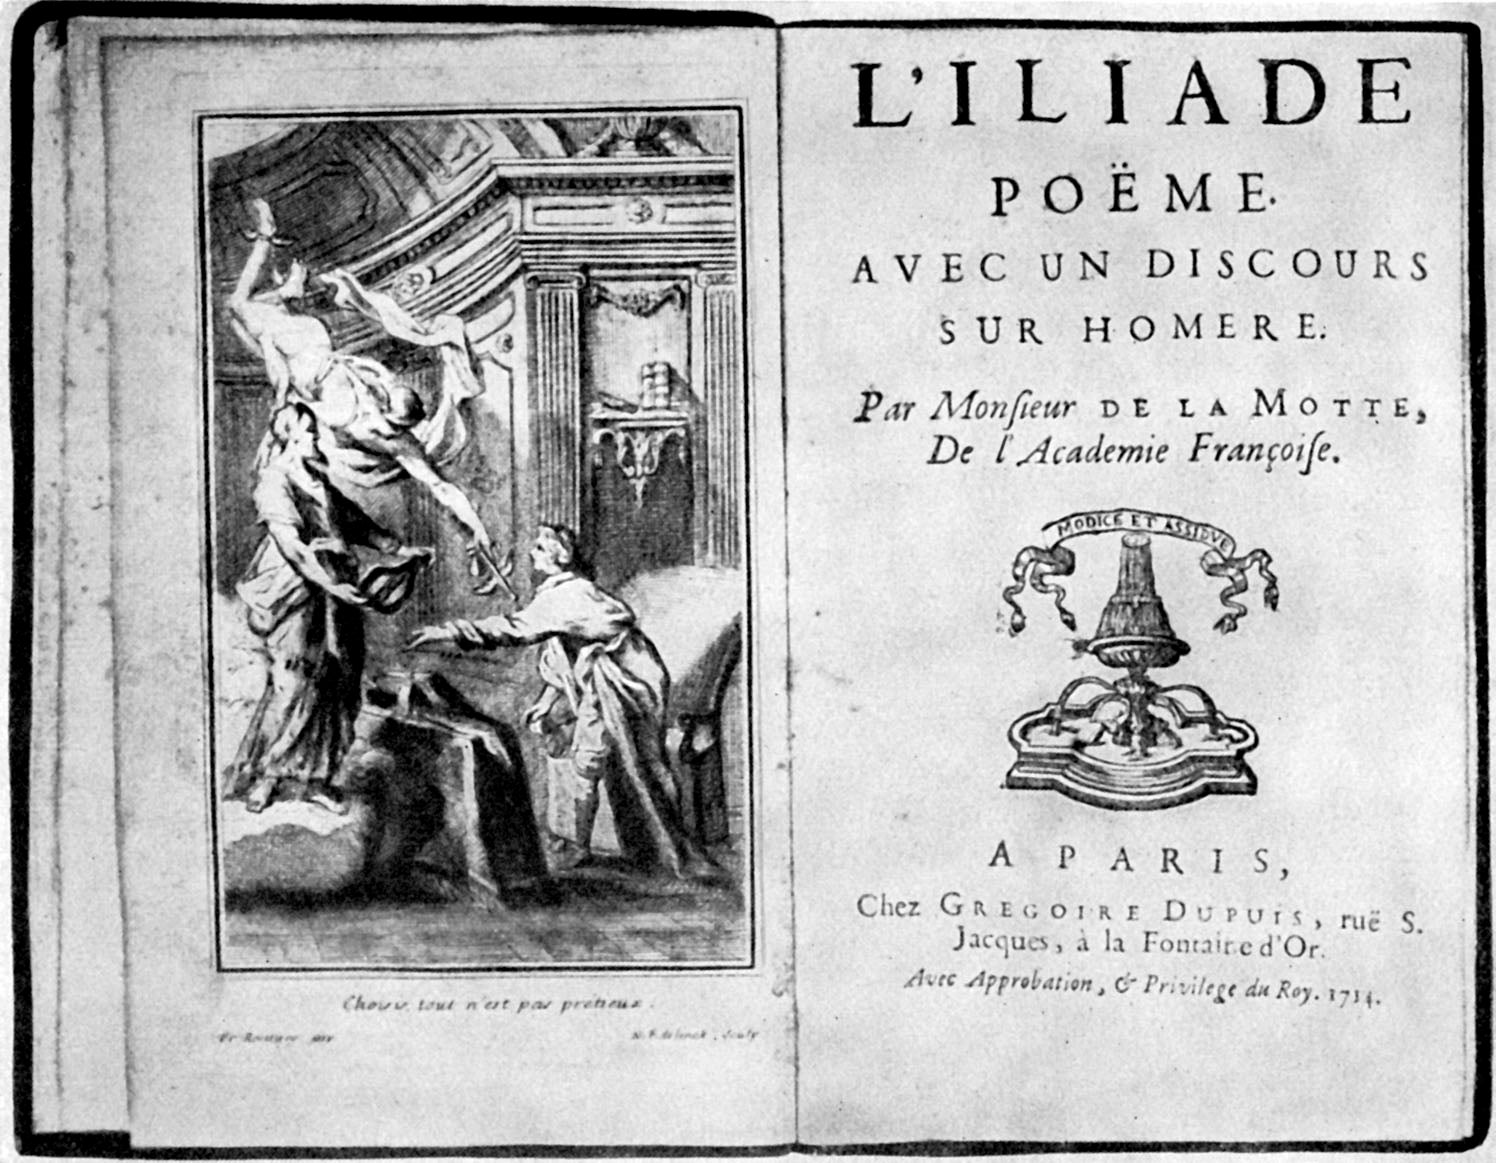 The Illiad by Homer (French edition, 1714)